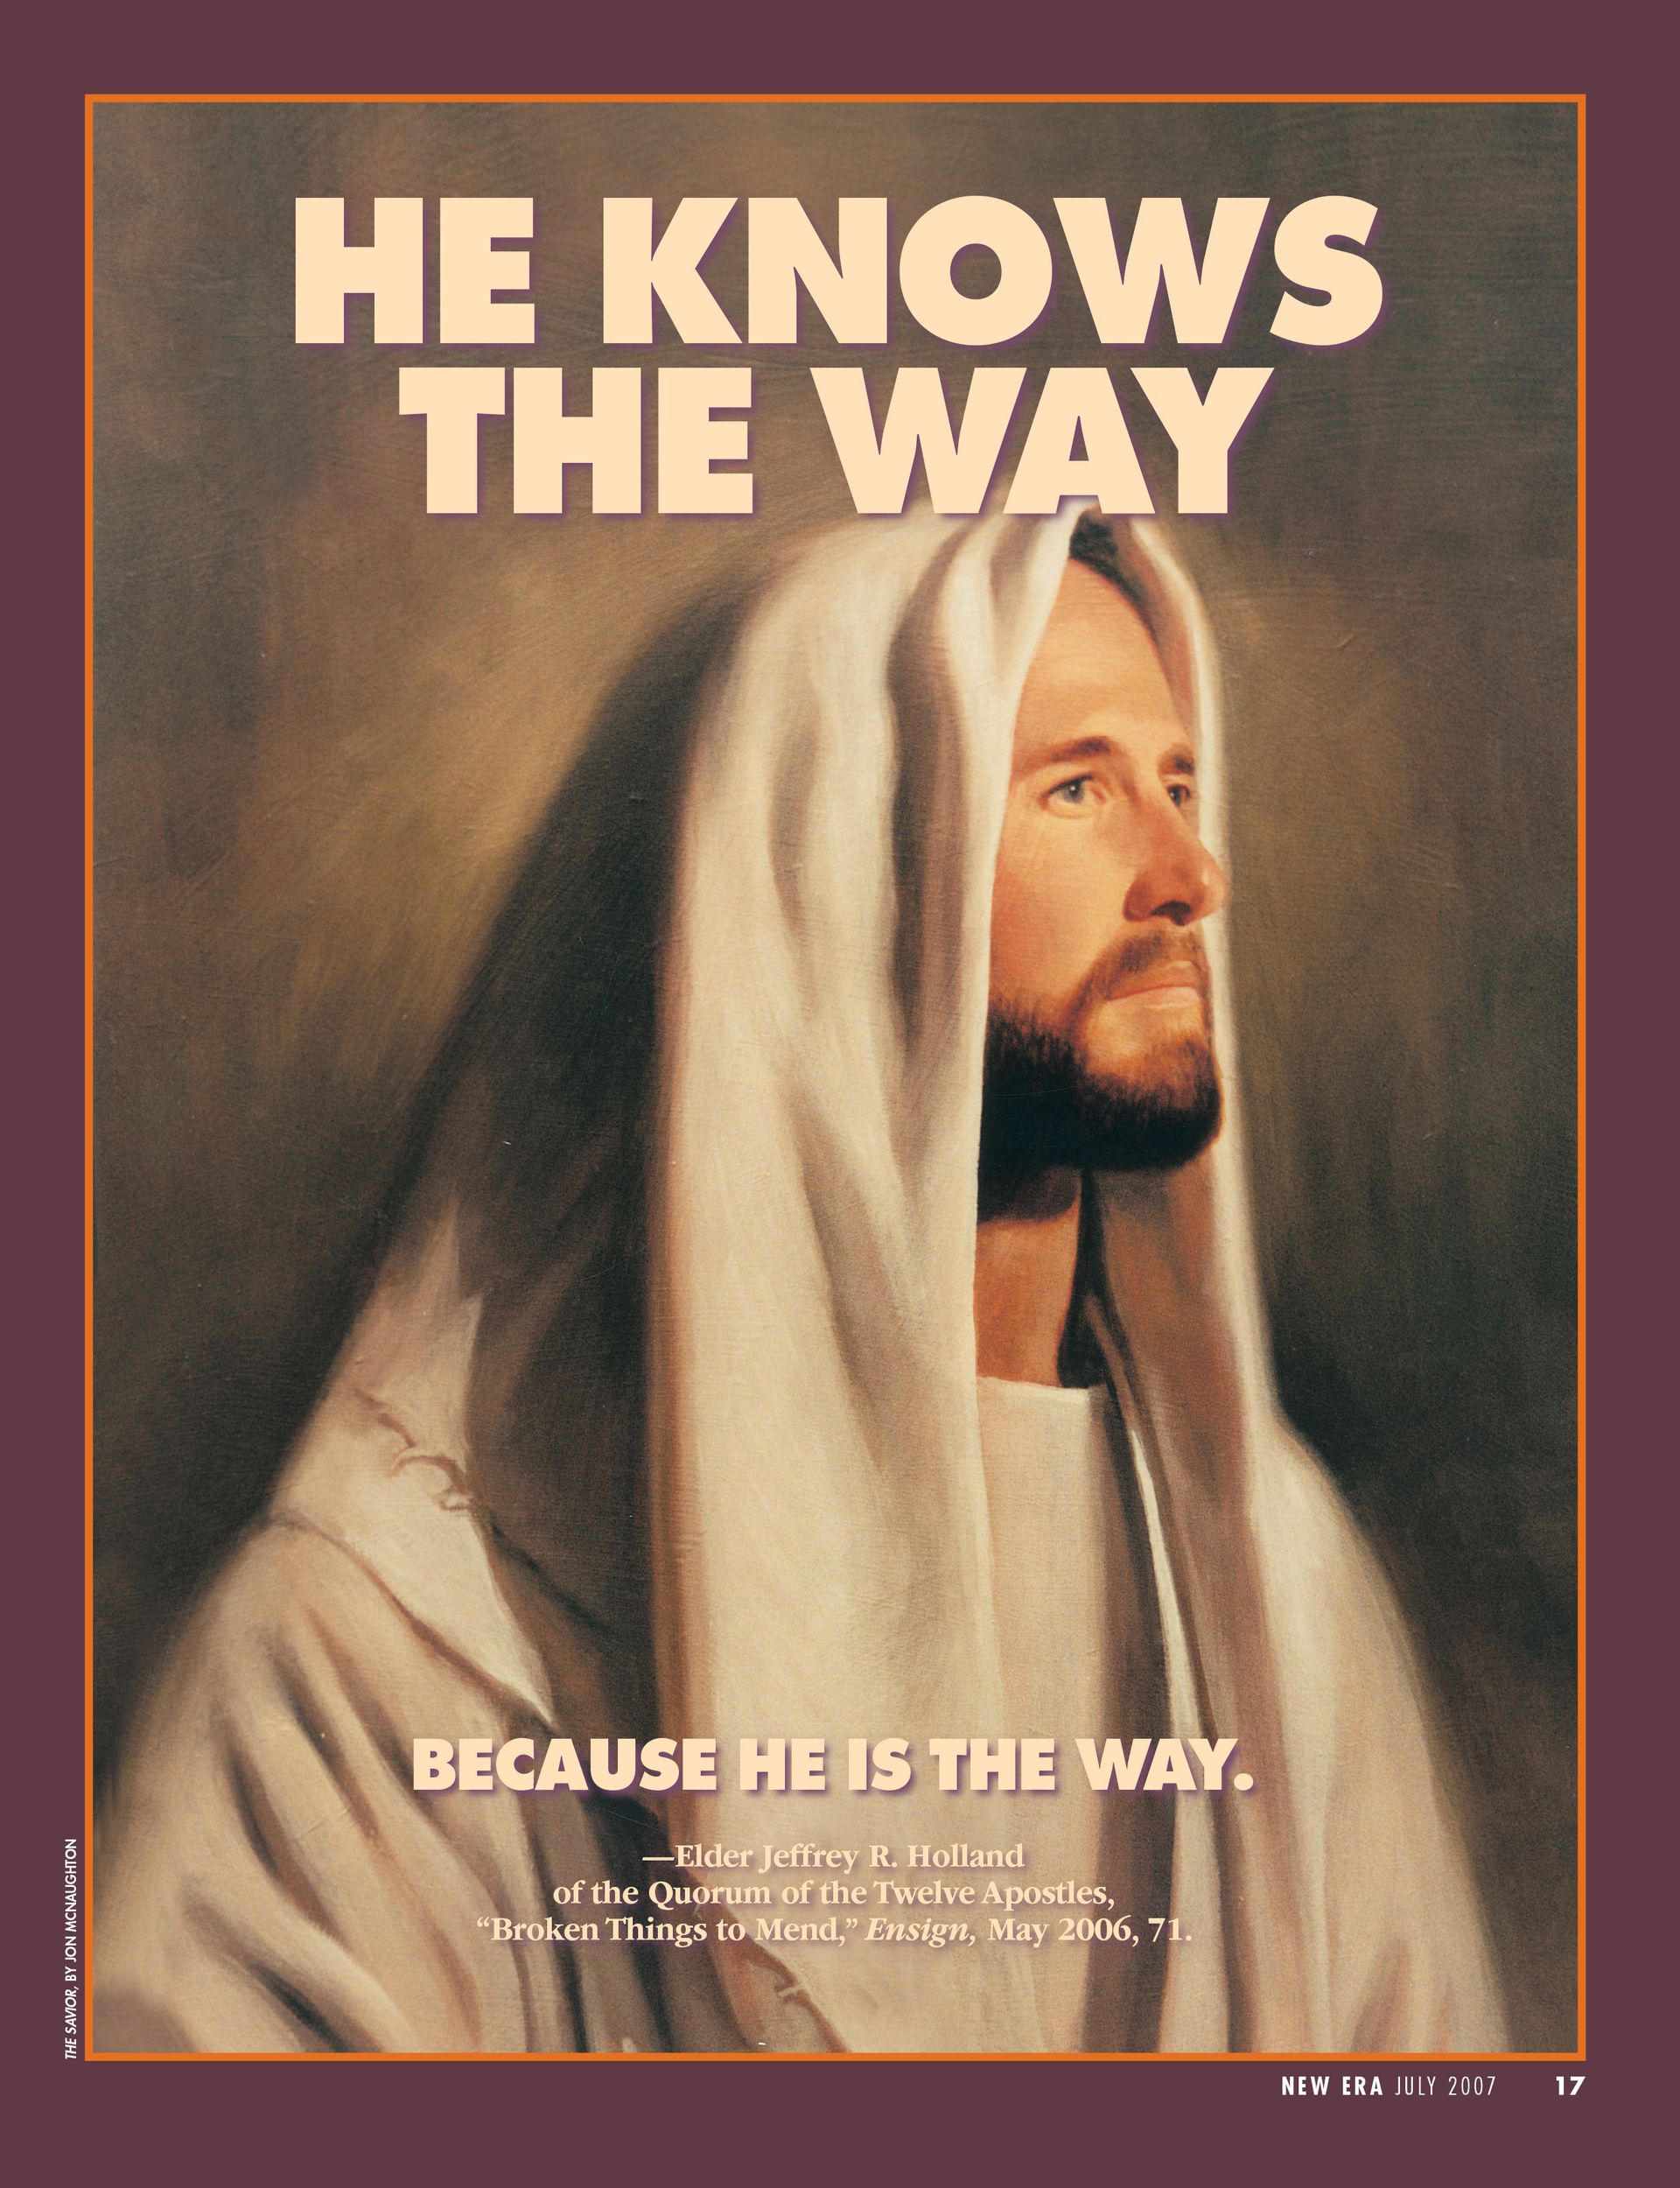 He Knows the Way Because He Is the Way. —Elder Jeffrey R. Holland of the Quorum of the Twelve Apostles, “Broken Things to Mend,” Ensign, May 2006, 71. July 2007 © undefined ipCode 1.